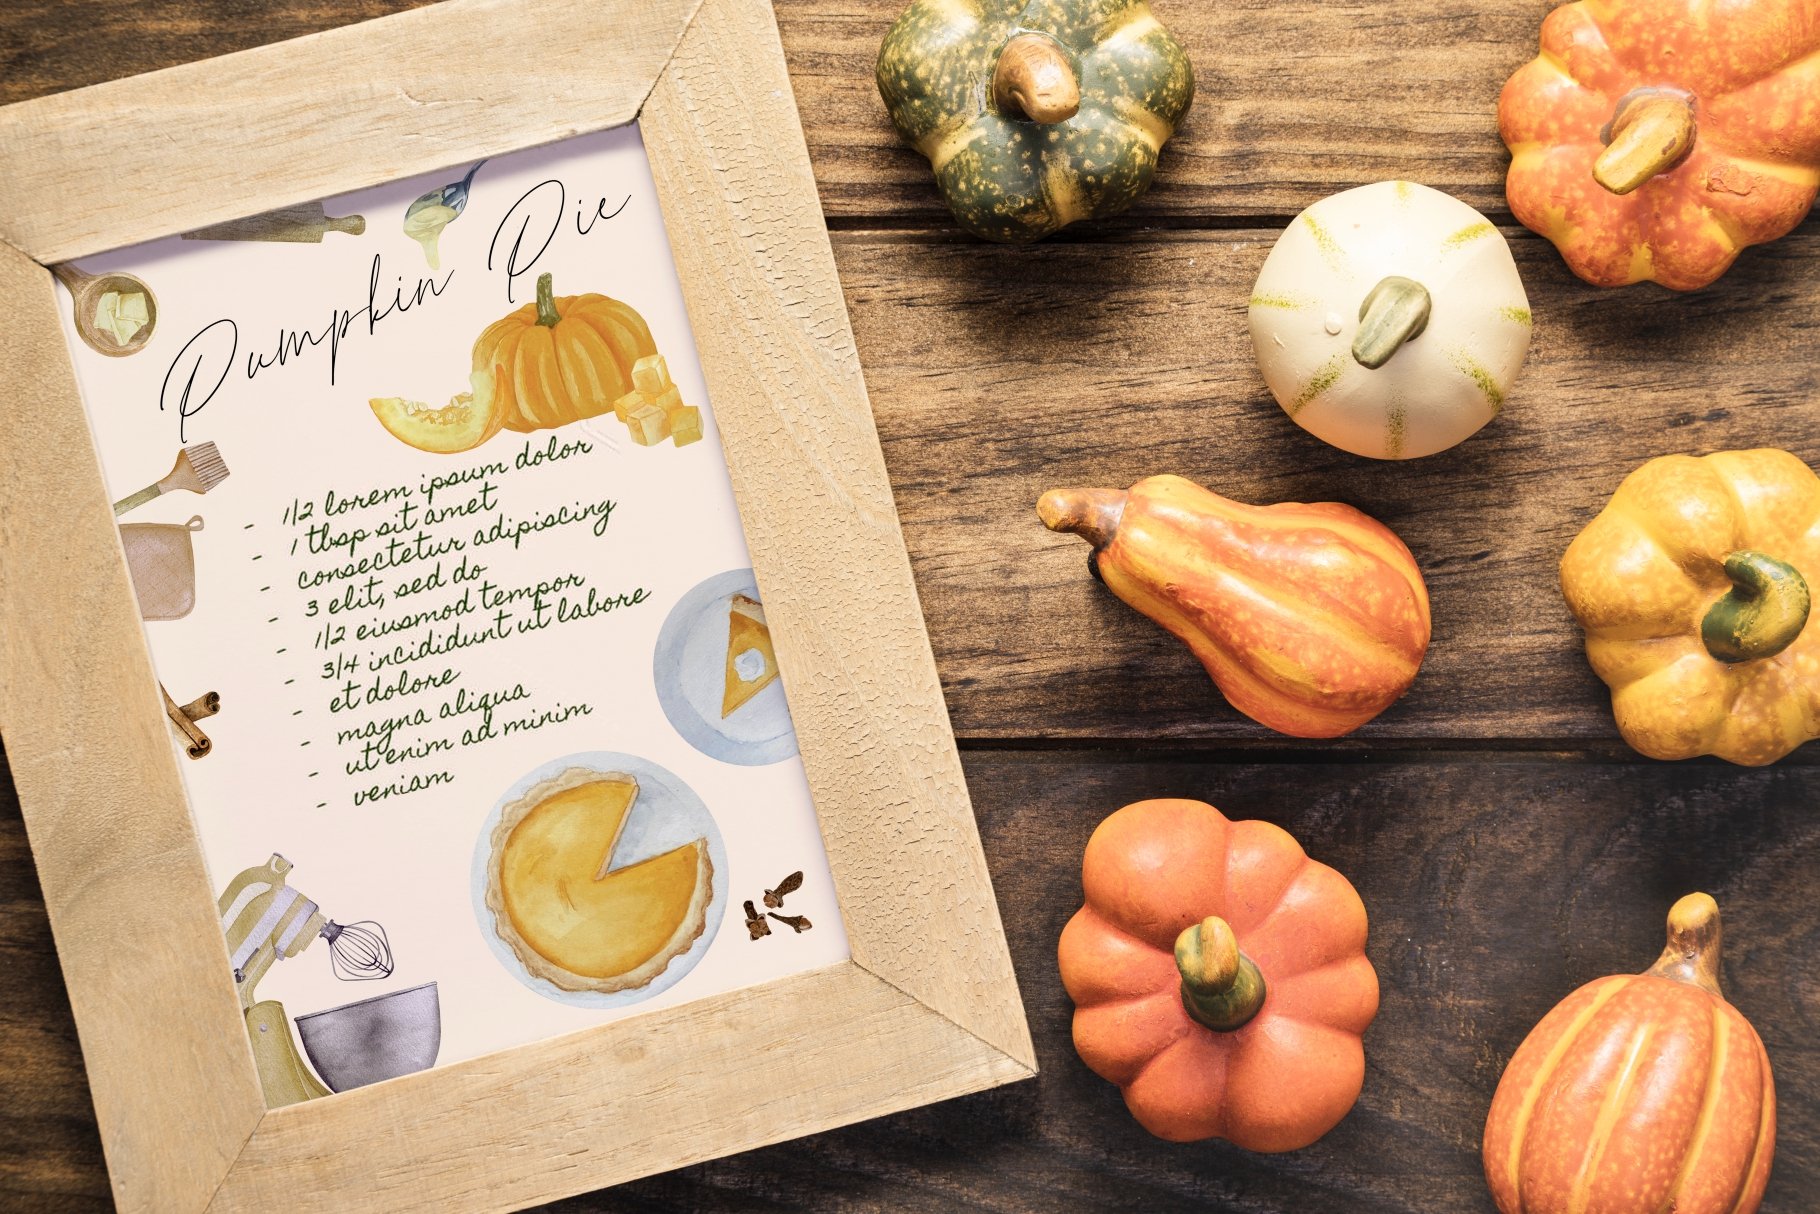 Perfect autumn illustrations for your recipe book.